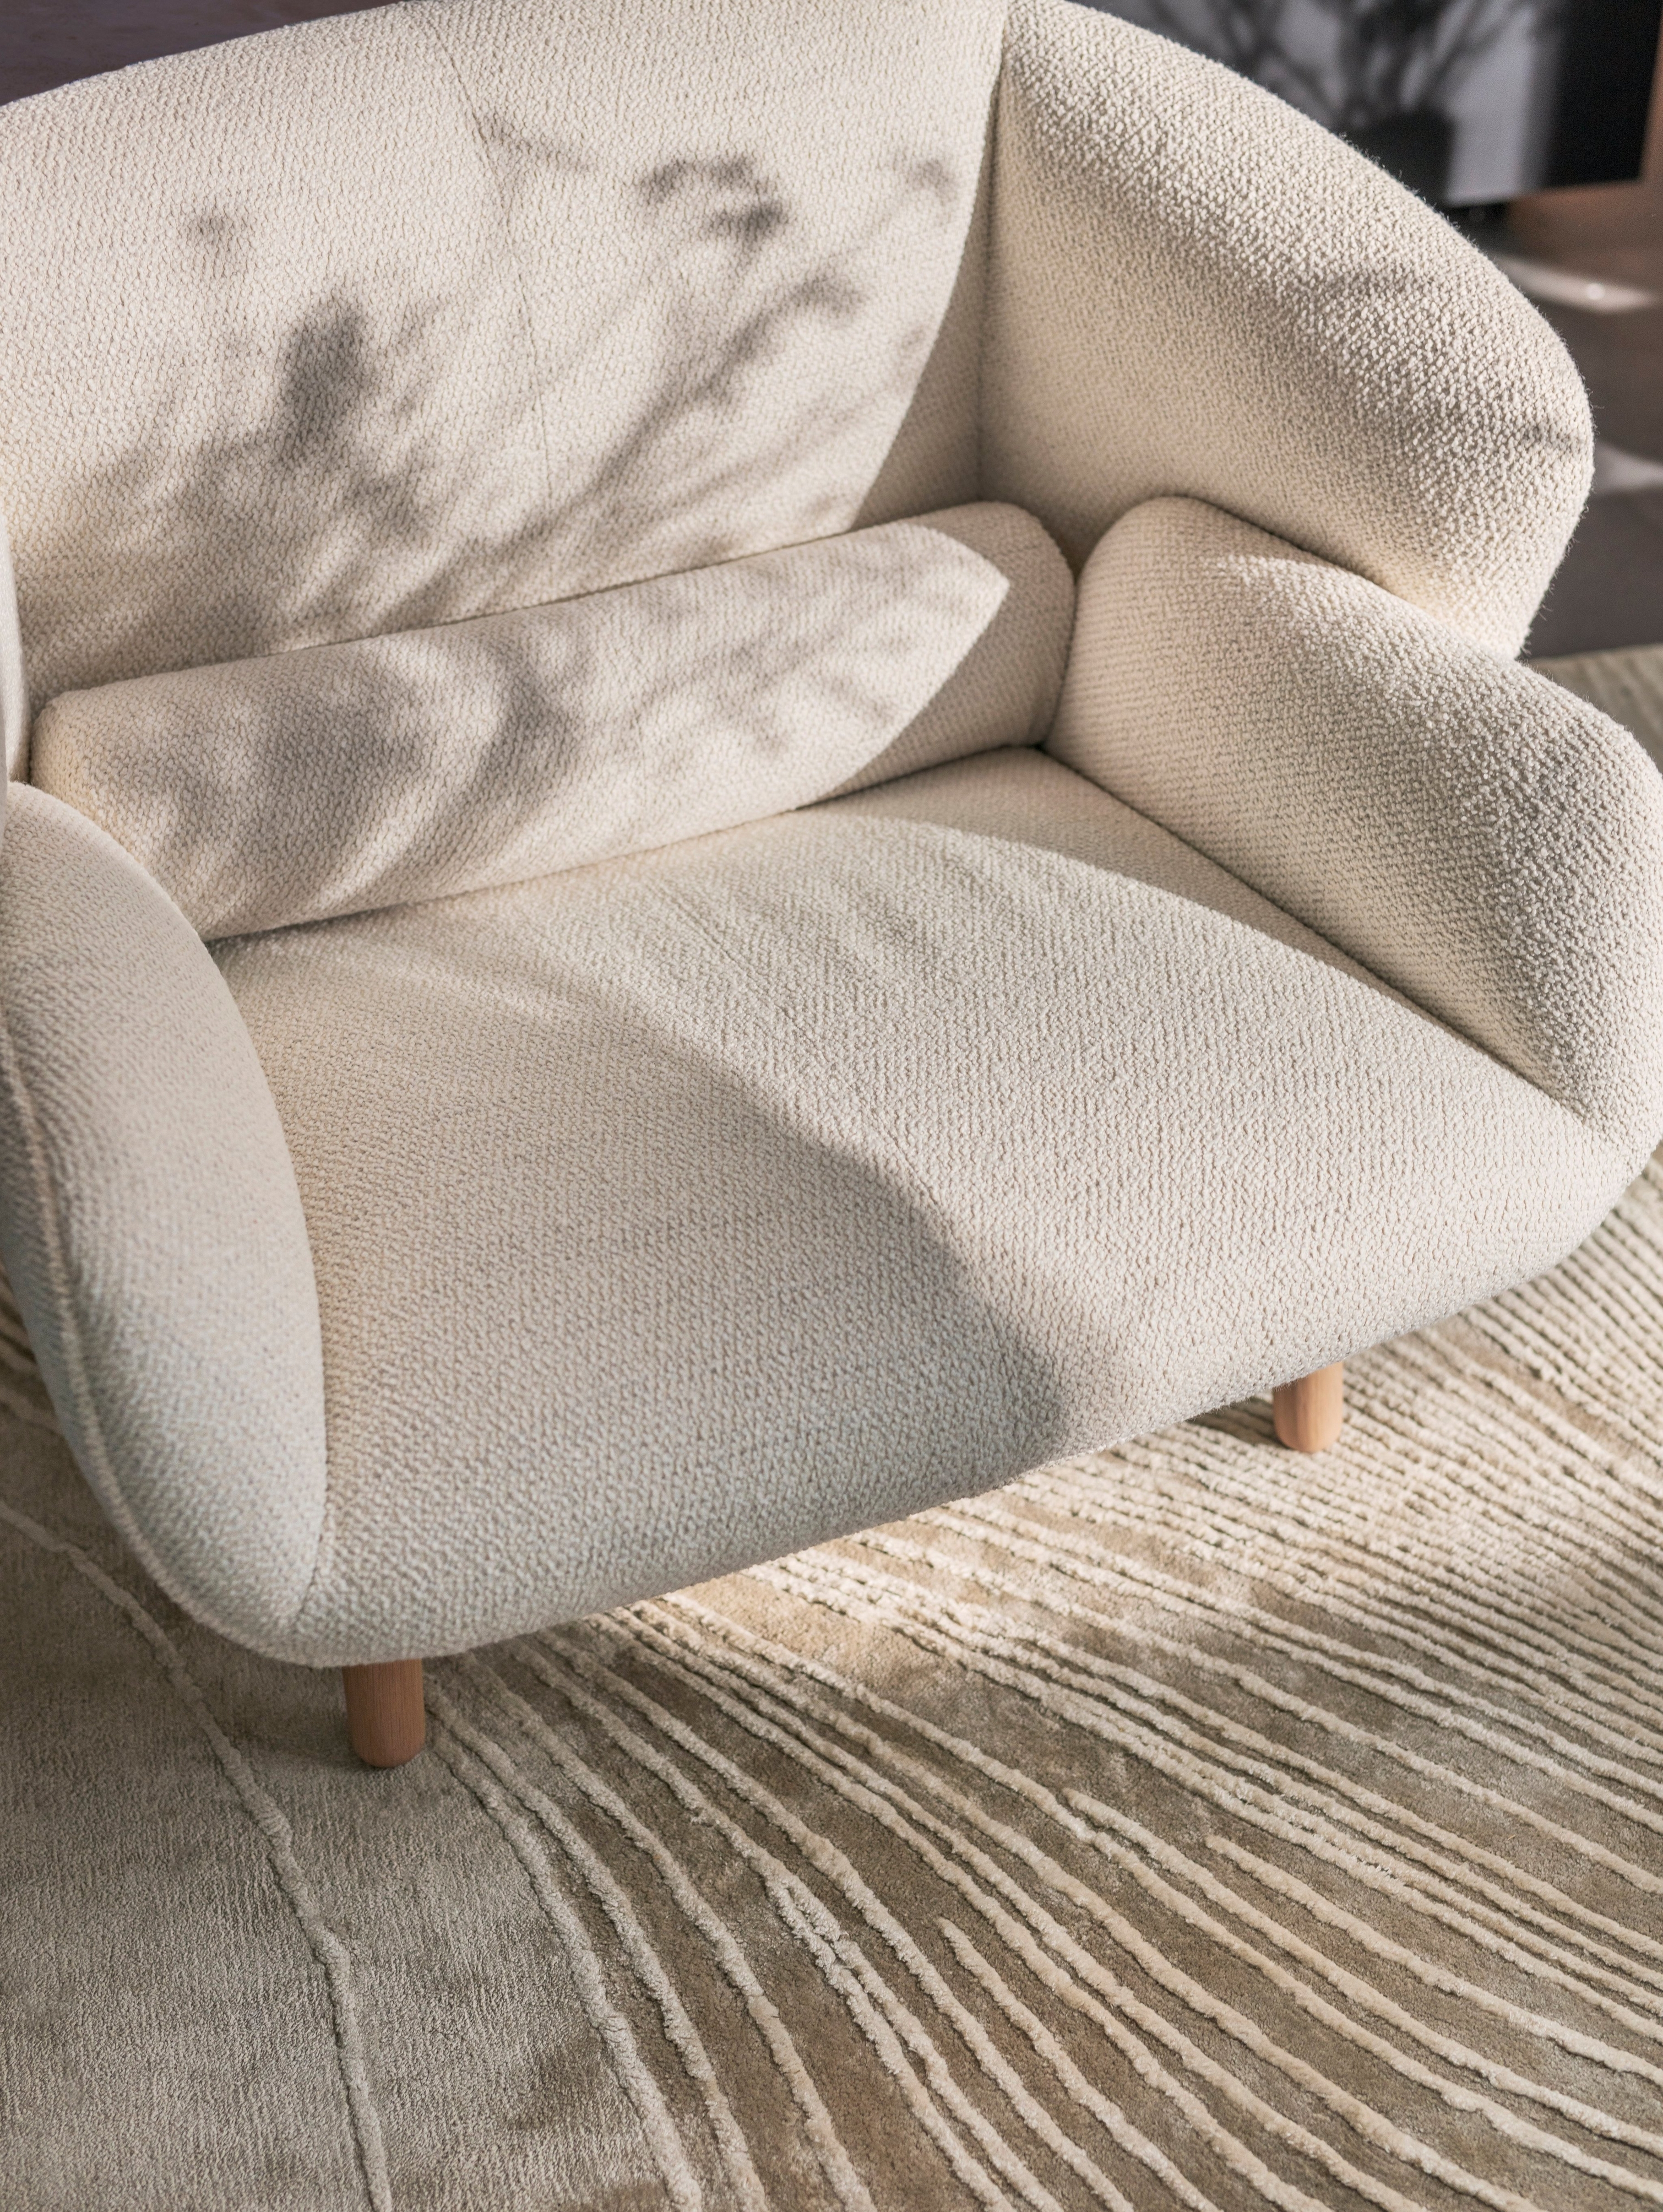 The Fusion armchair in white Lazio fabric styled with the Tide rug in grey/white.